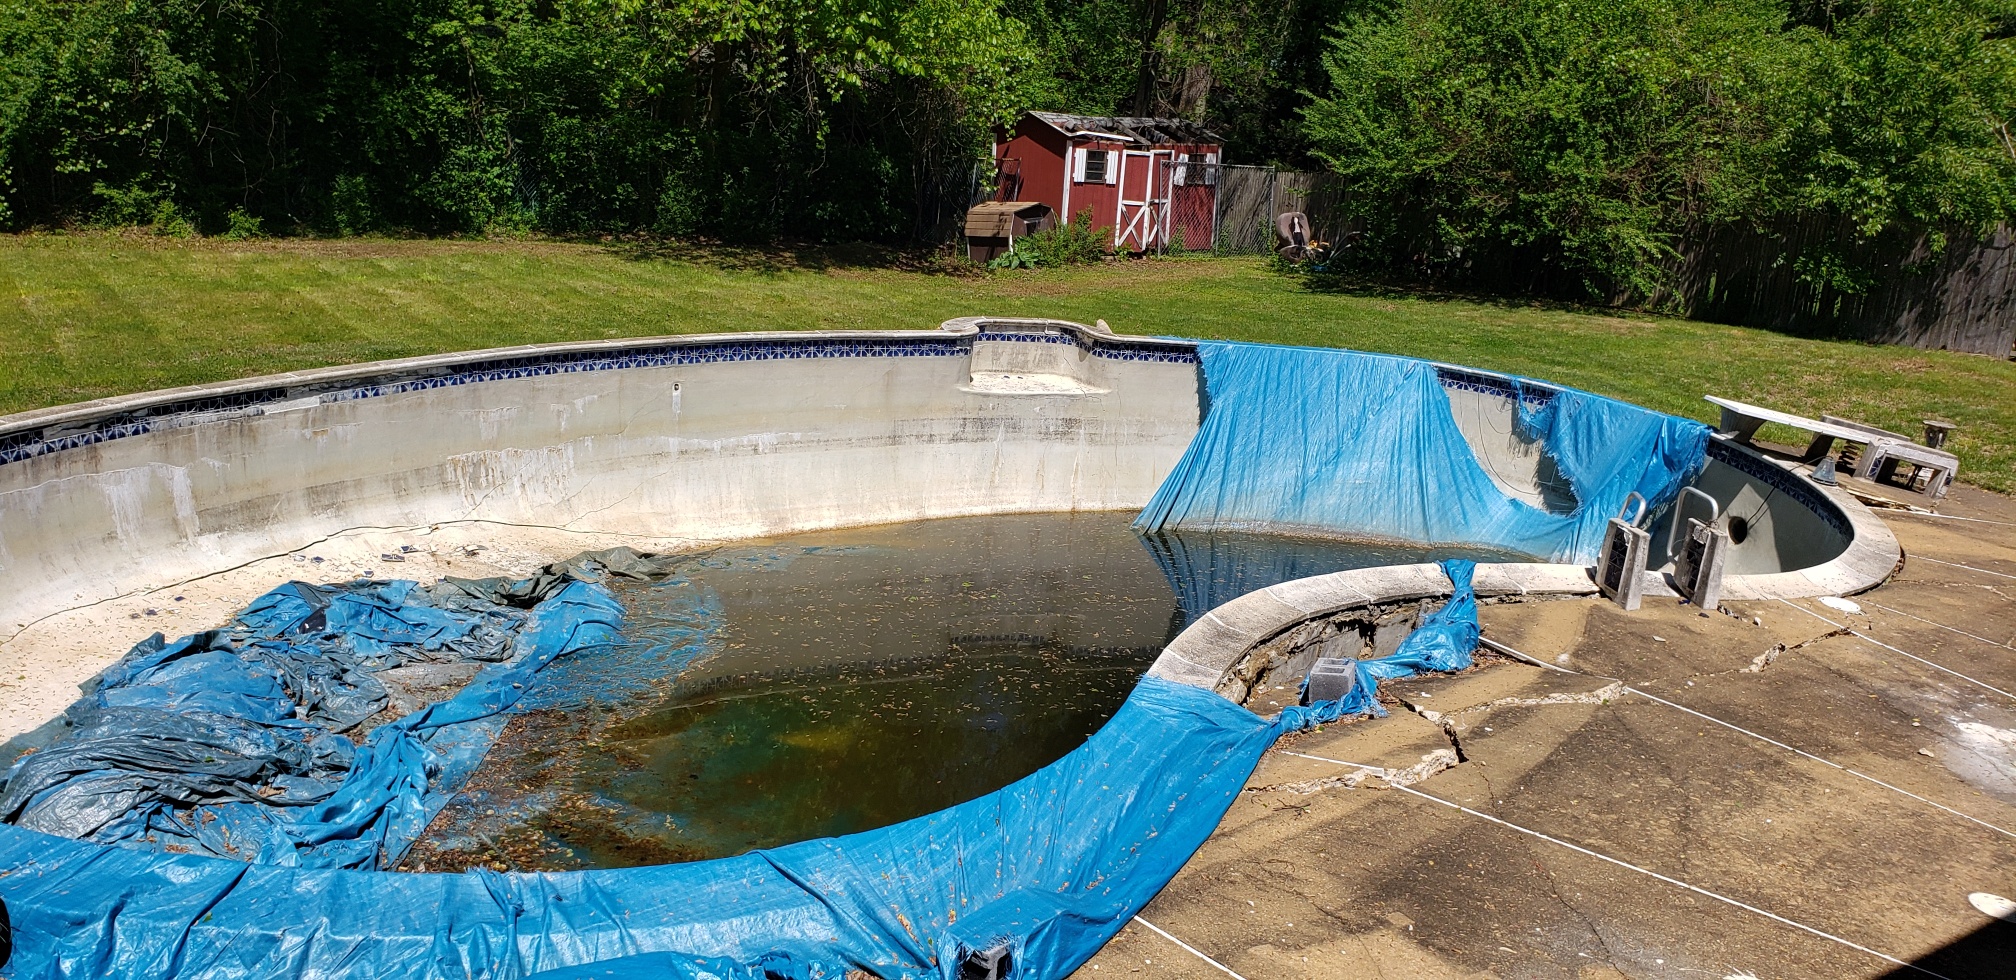 6 Steps For A Successful Pool Removal - Dirt Connections